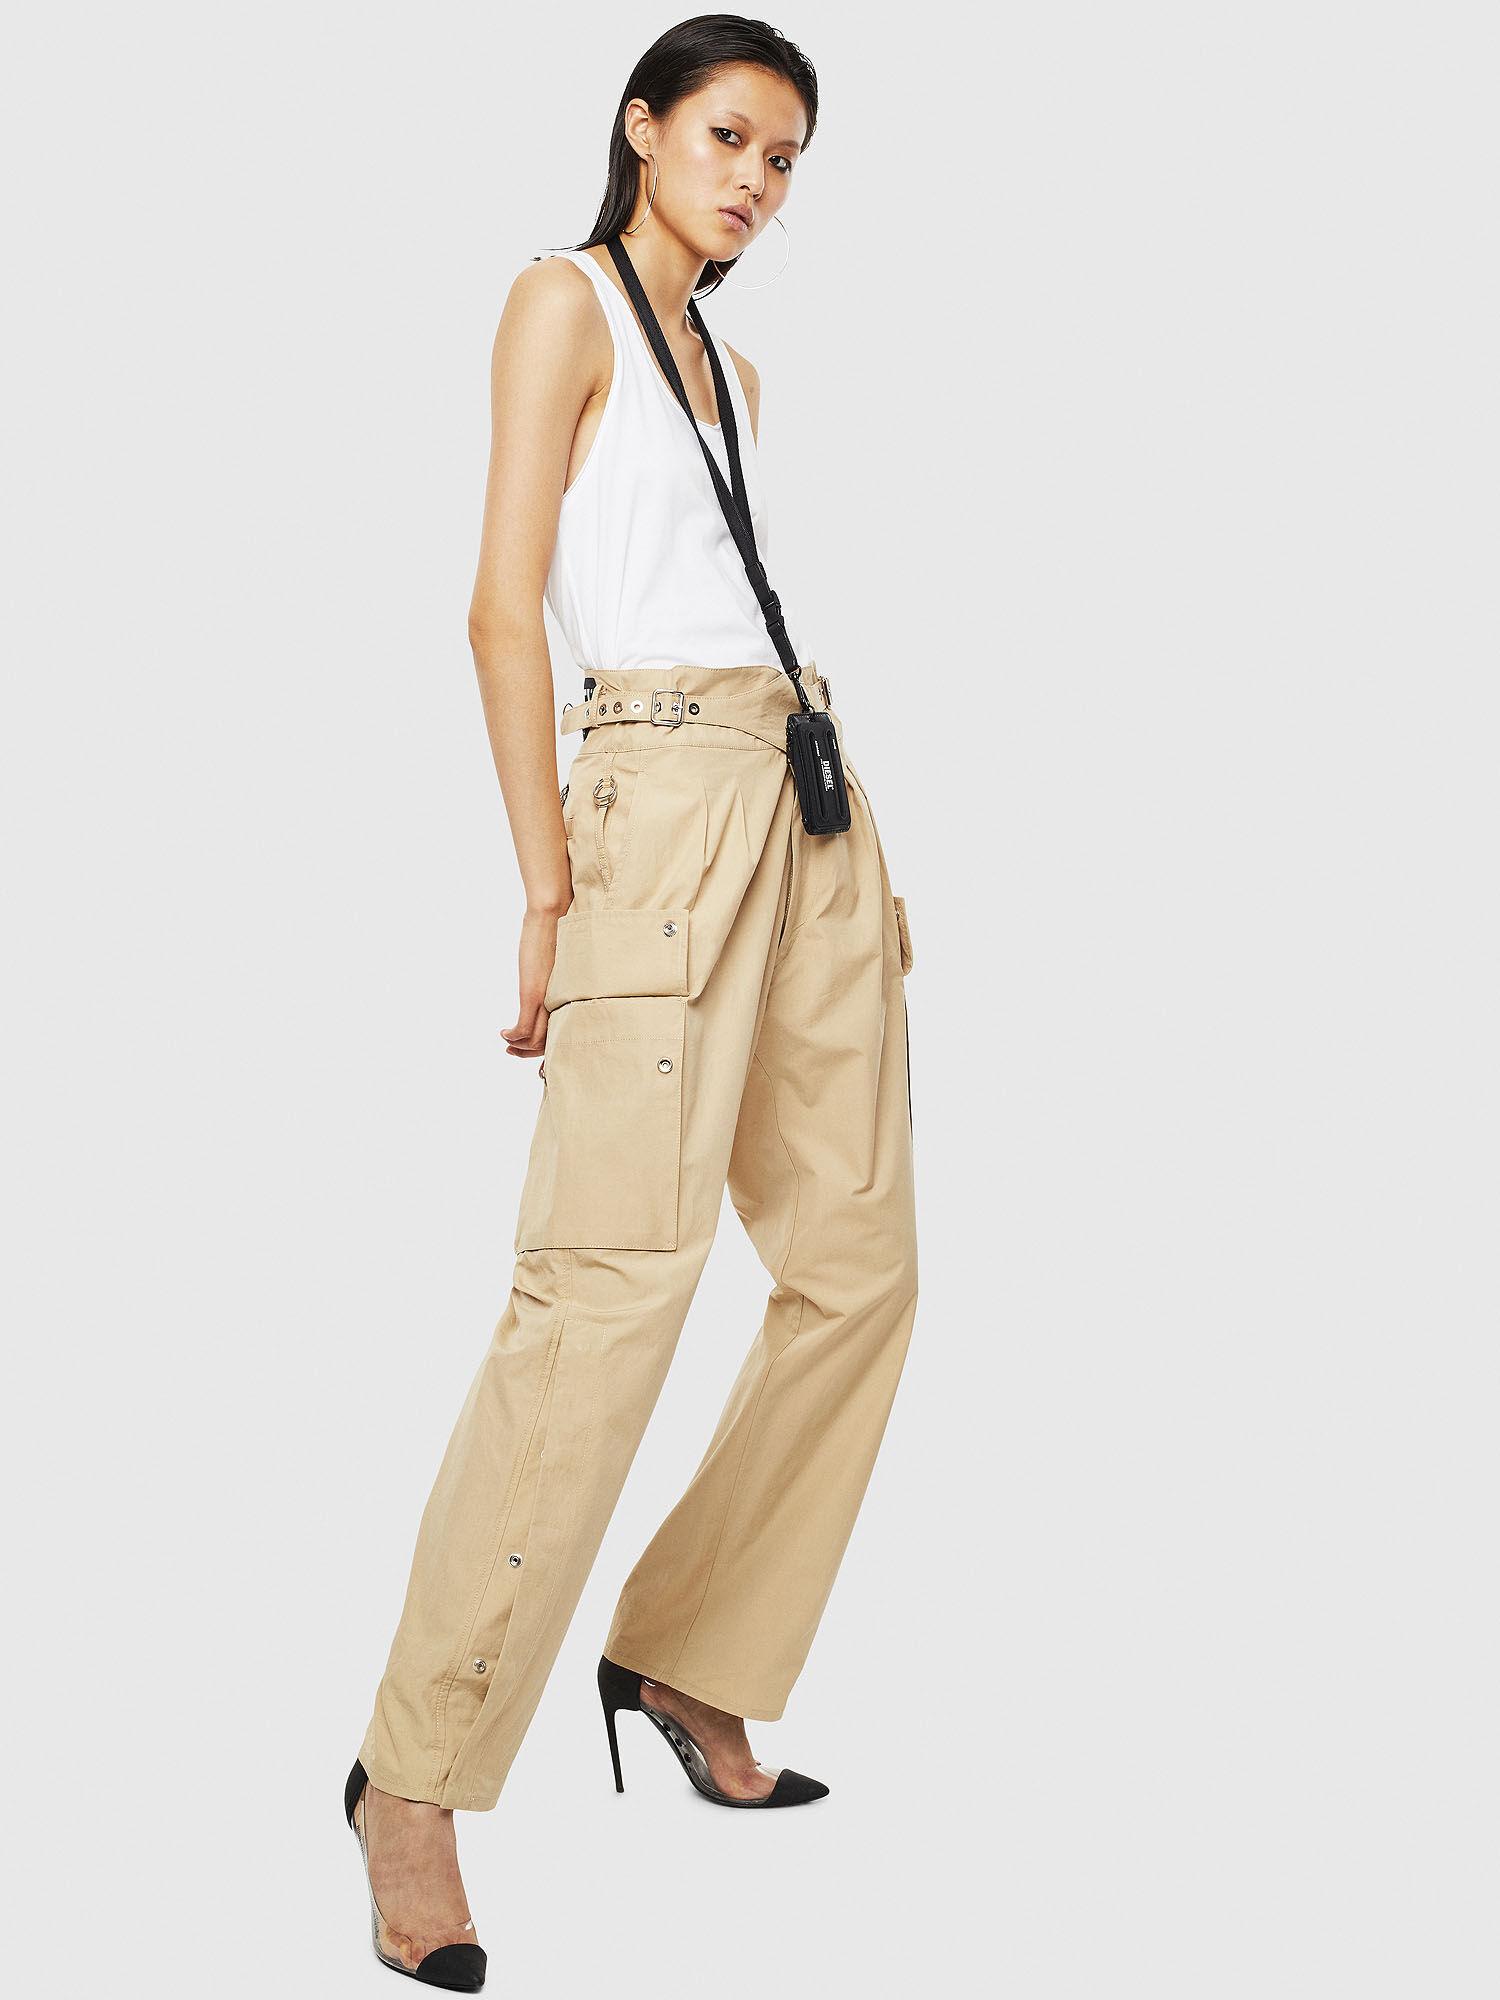 High Waisted Cargo Pants With Belt  Shop Old 4Th Of July at Papaya Clothing